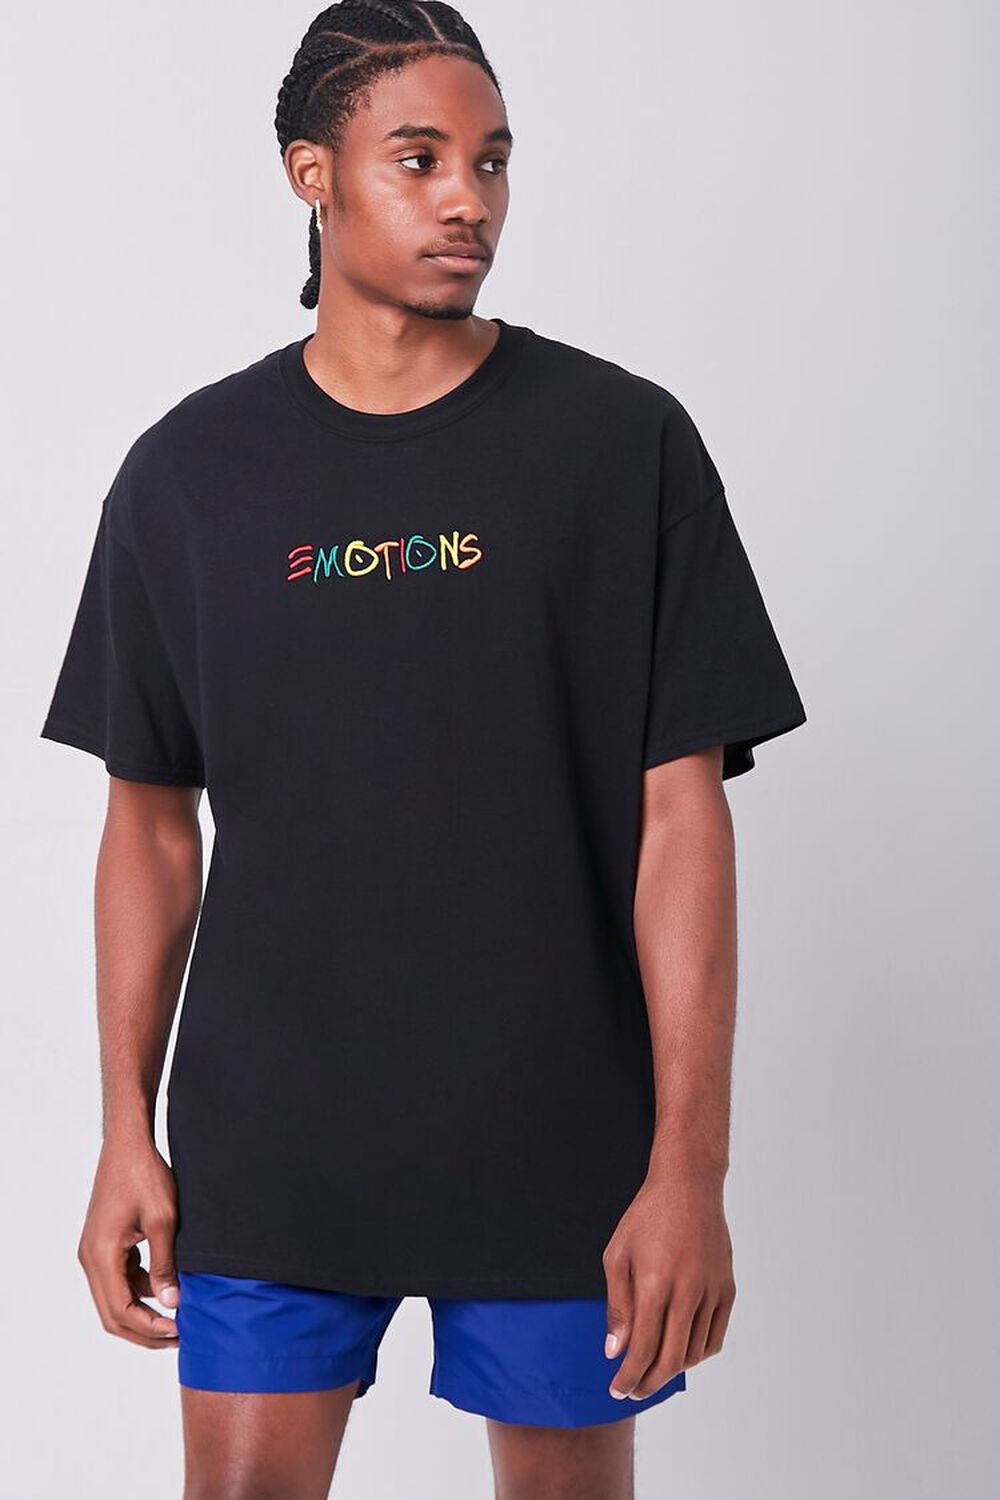 BLACK/MULTI Emotions Embroidered Graphic Tee, image 1